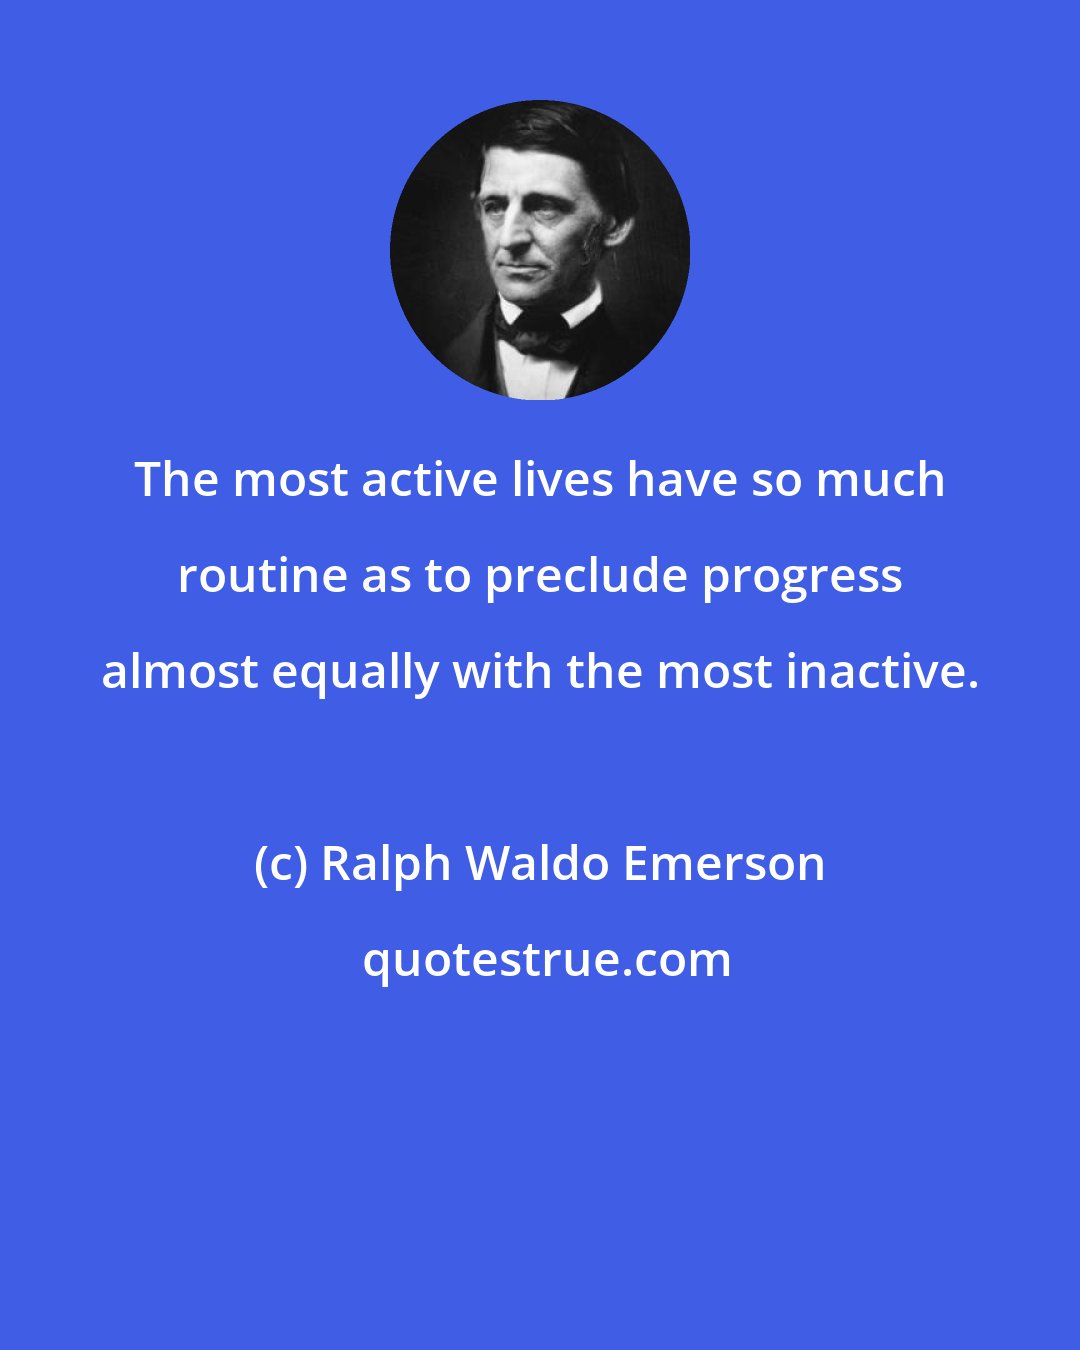 Ralph Waldo Emerson: The most active lives have so much routine as to preclude progress almost equally with the most inactive.